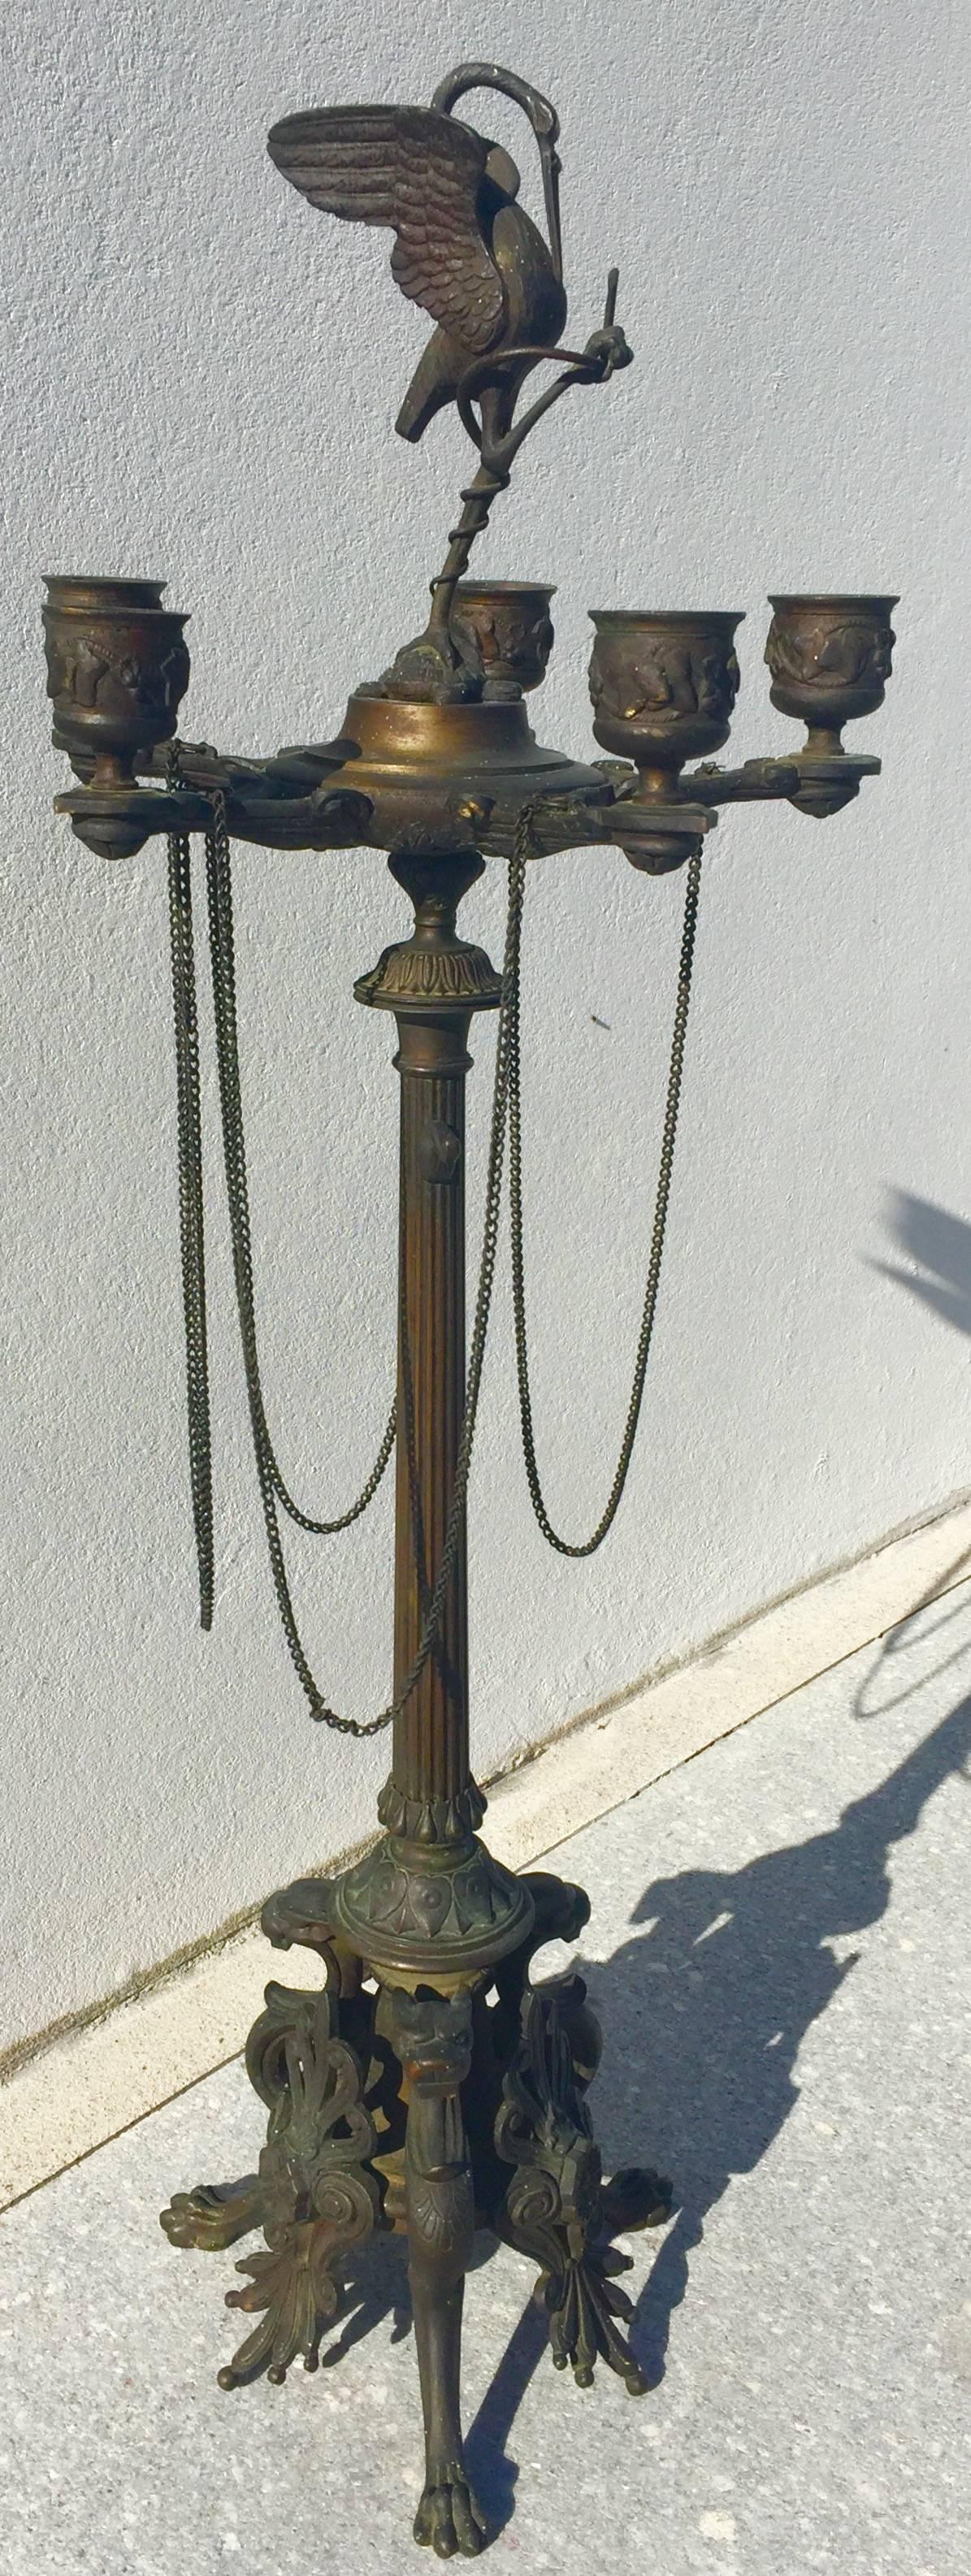 Tourists brought these home after visiting Italy during the grand tour period. They are cast of solid bronze in France.
Rising from the lion-footed base is a column holding a five-arm oil lamp with delicate chains hanging from it. The column has a